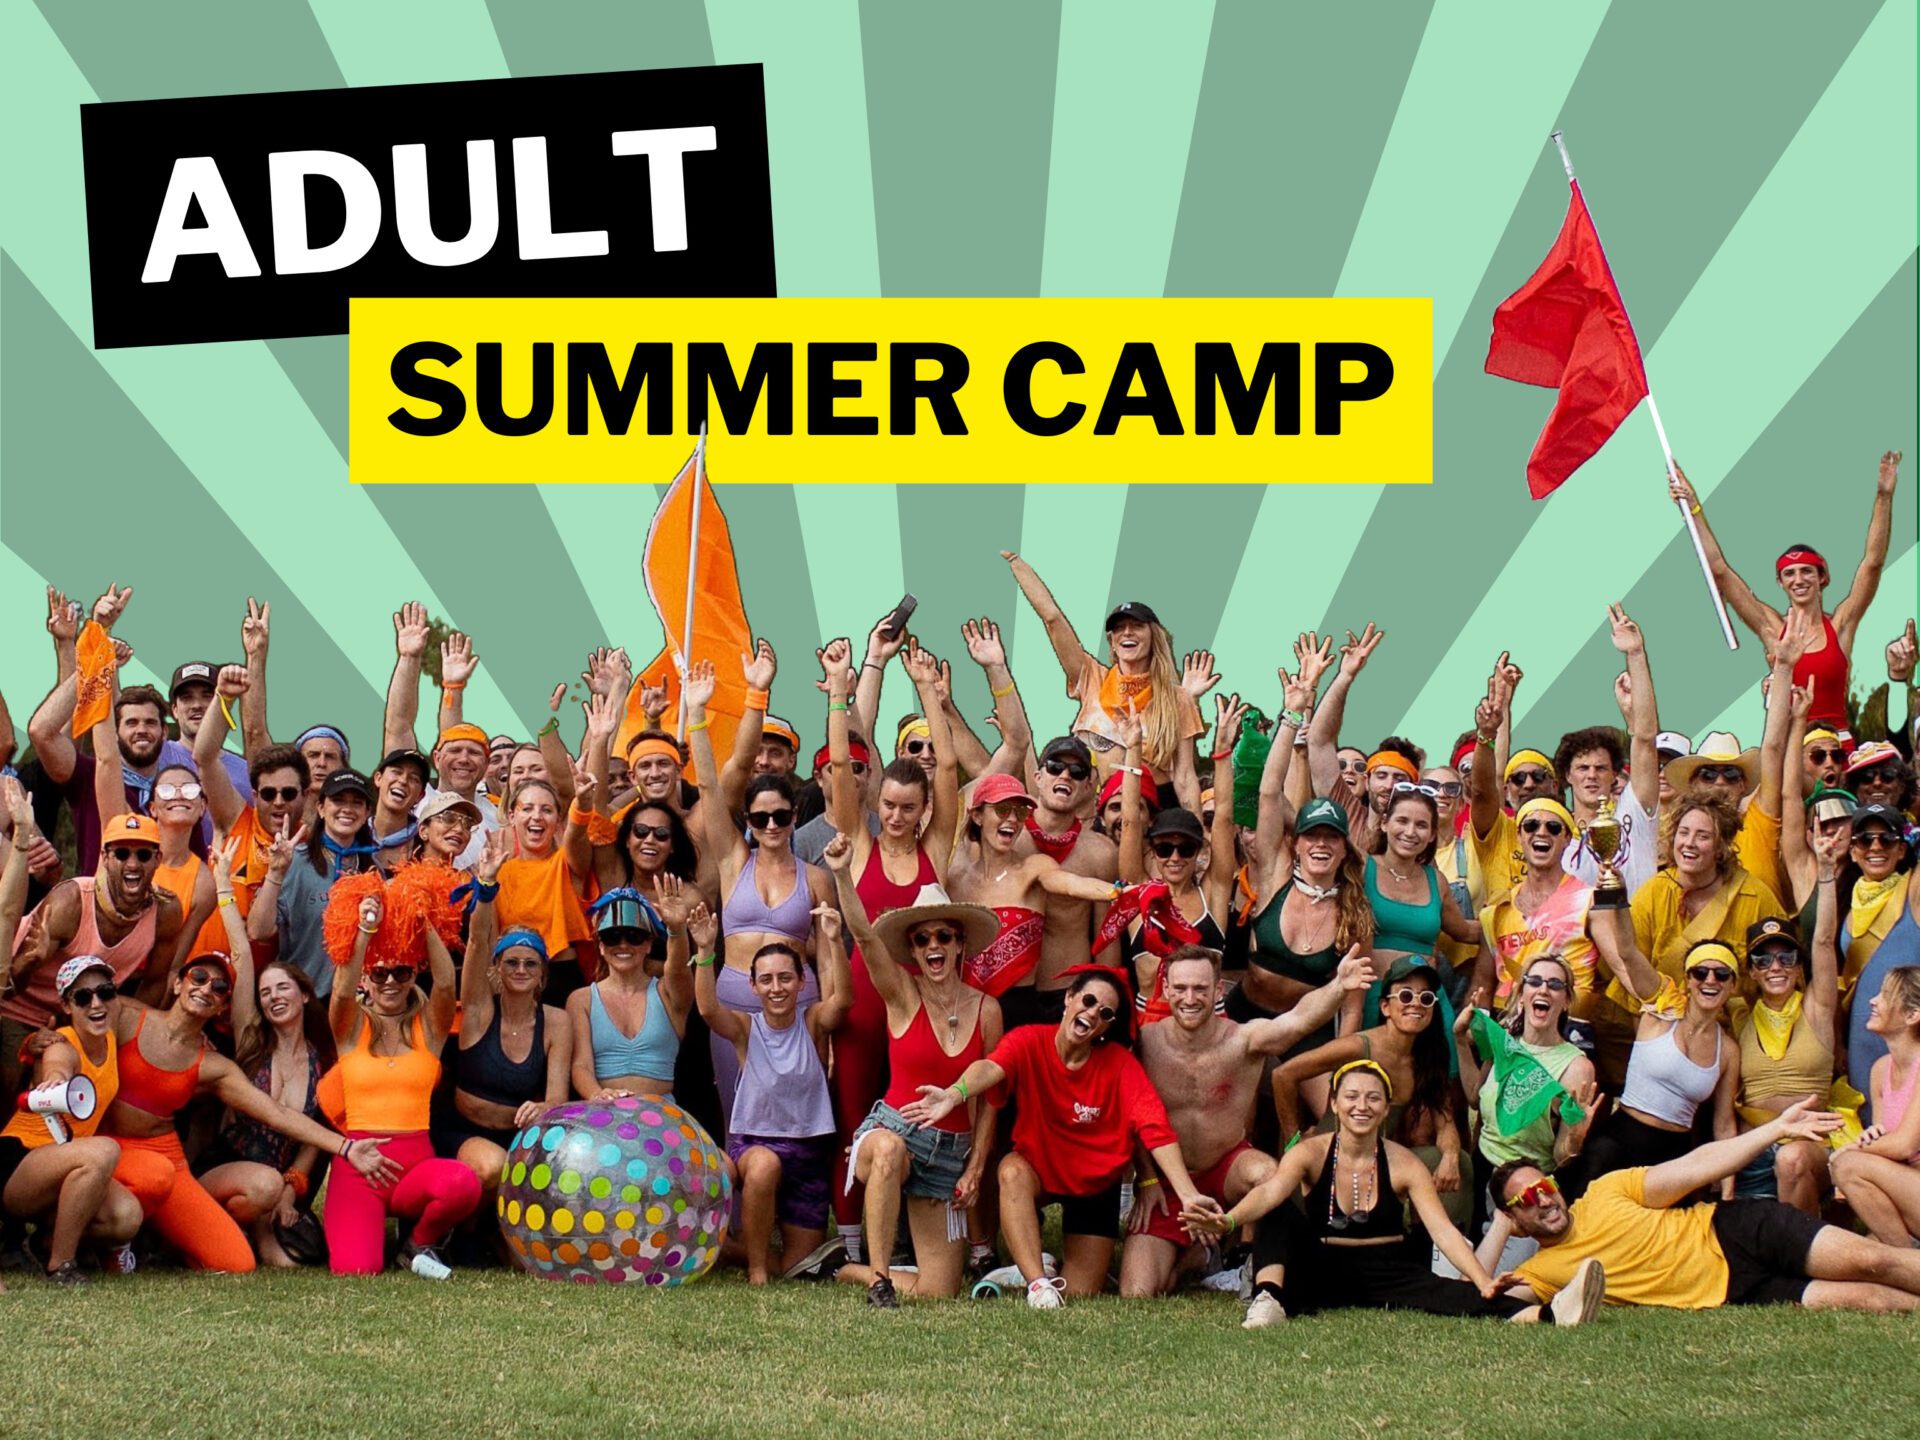 31 Summer Camp Activities for Adults